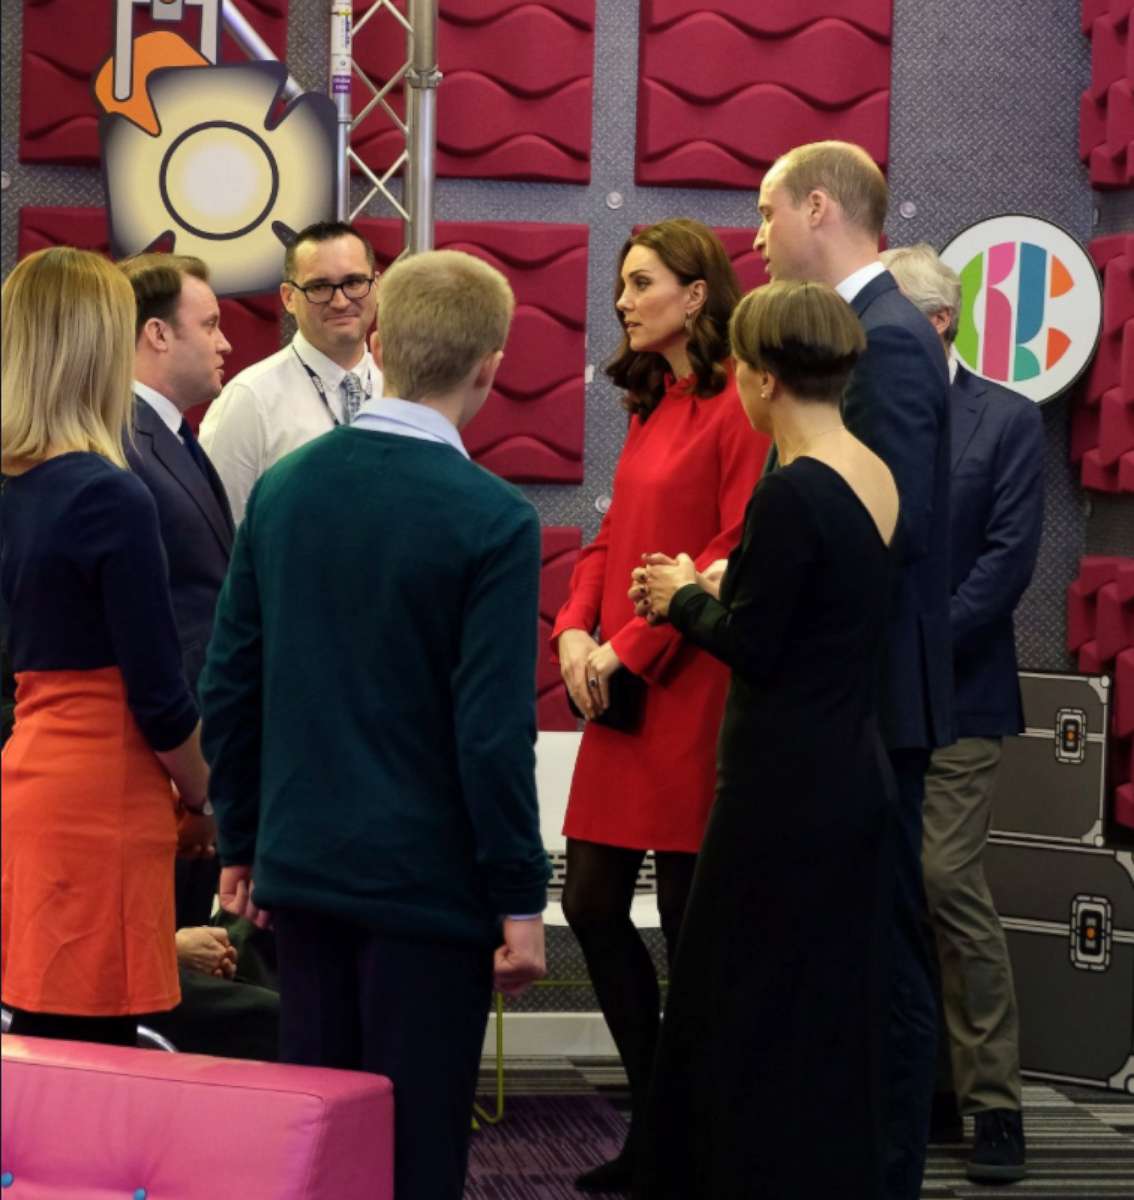 PHOTO: Kate Middleton and Prince William visit the BBC Children’s department to see how the BBC runs interactive workshops called “Stepping Out” sessions during the Children’s Global Media Summit in Manchester, U.K., Dec. 6, 2017.